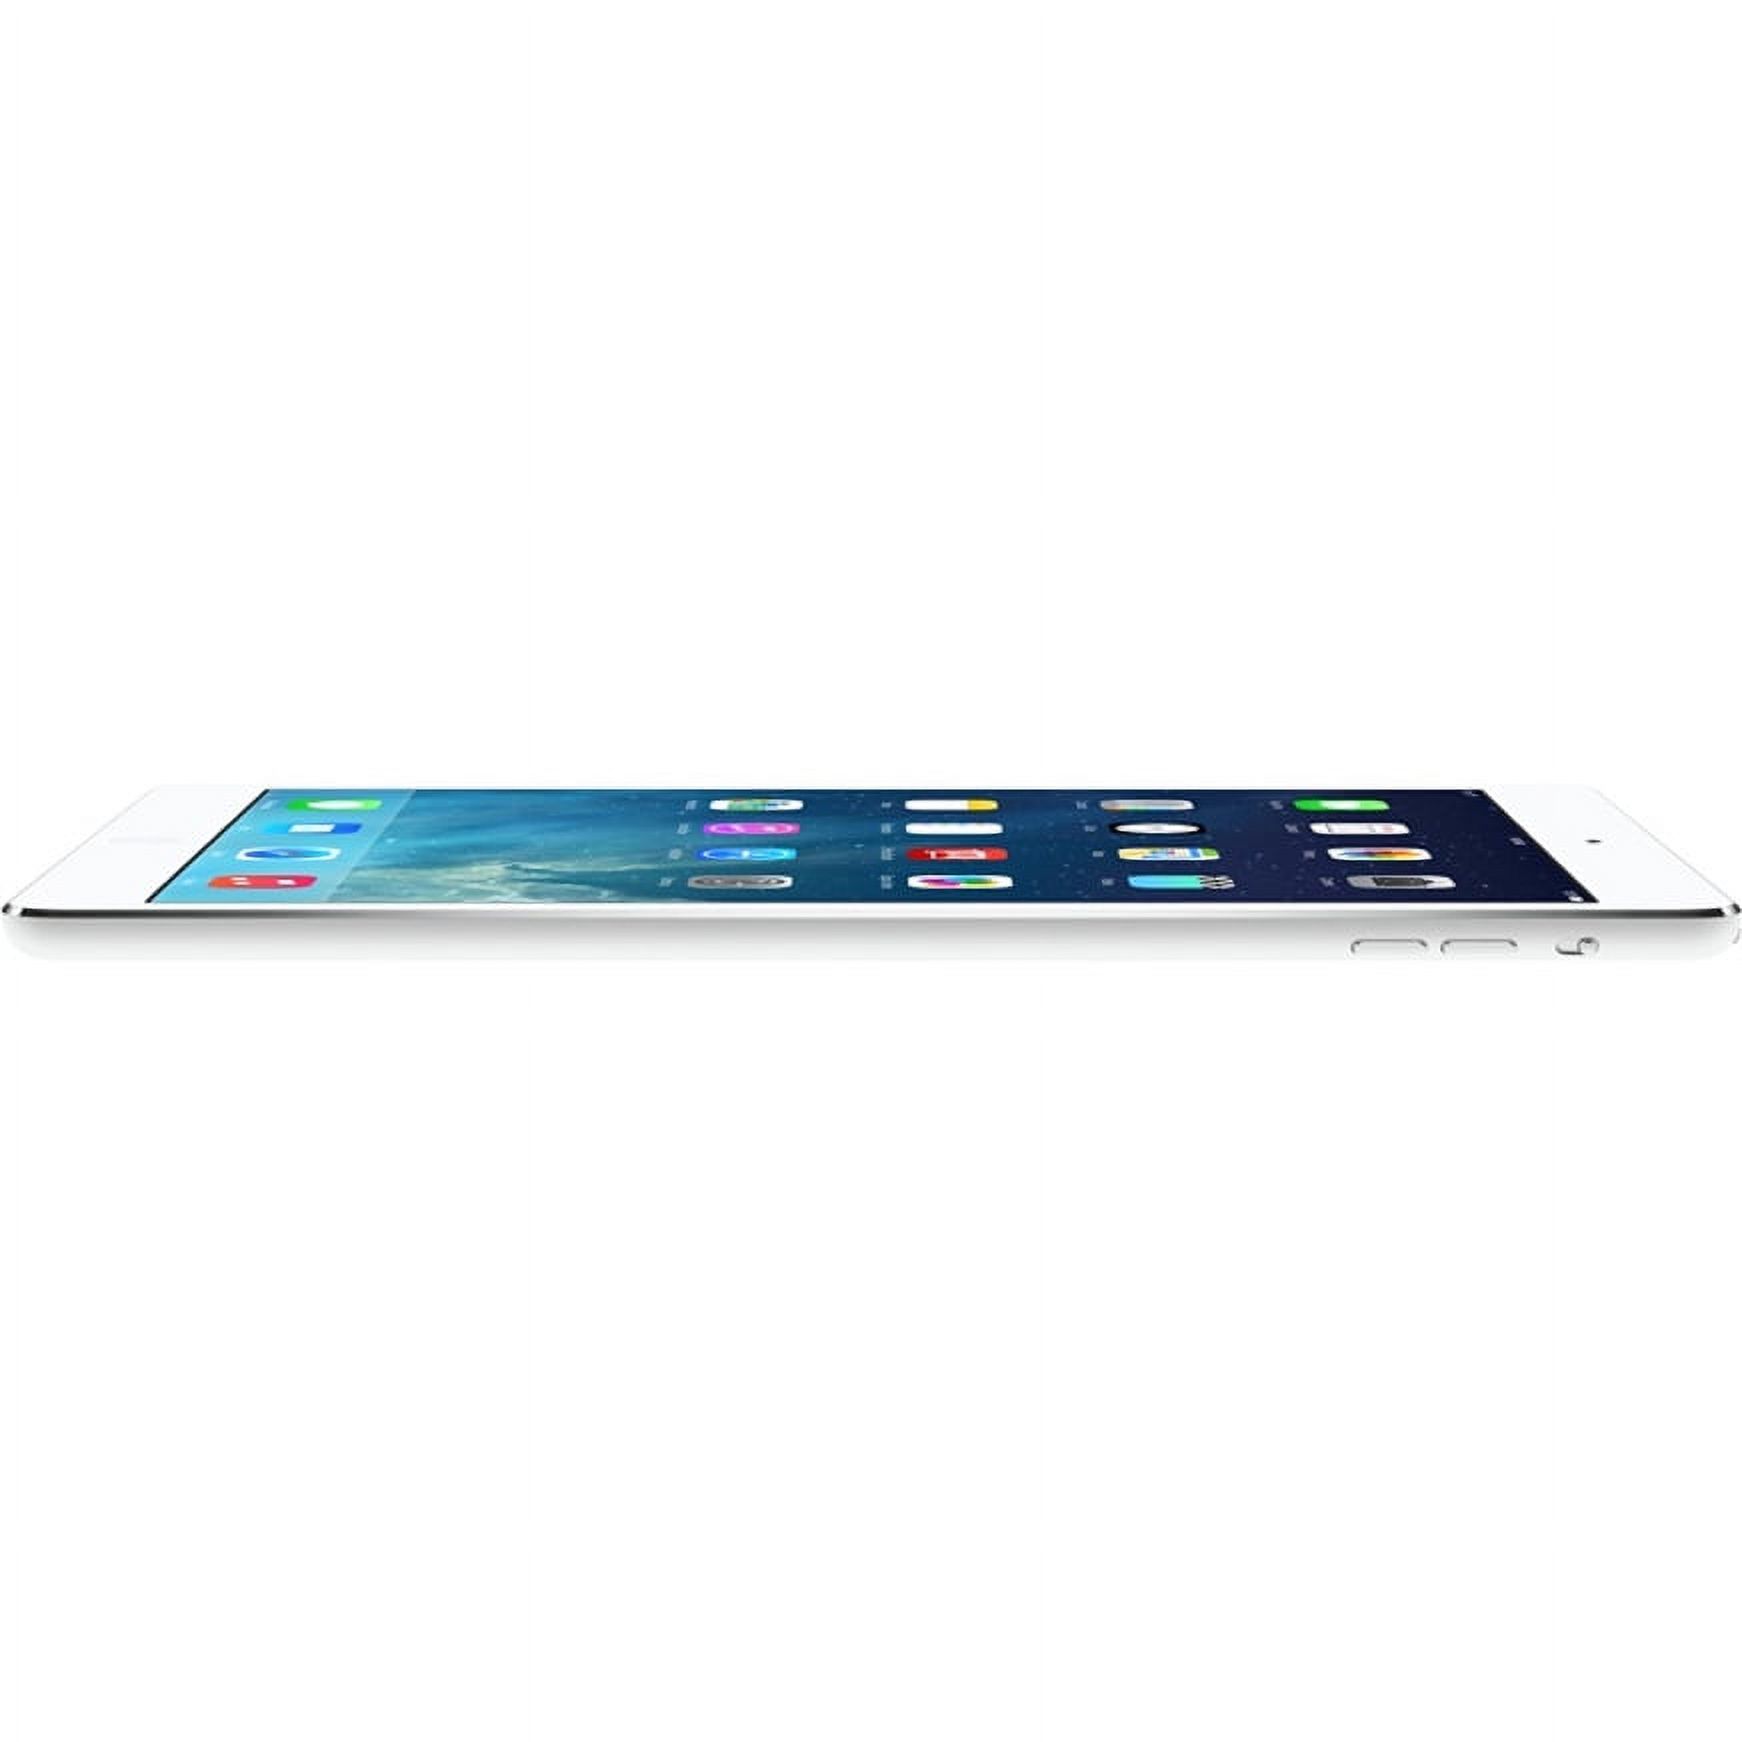 Apple iPad Air MF021LL/A Tablet, 9.7" QXGA, Cyclone Dual-core (2 Core) 1.30 GHz, 16 GB Storage, iOS 7, Silver - image 3 of 6